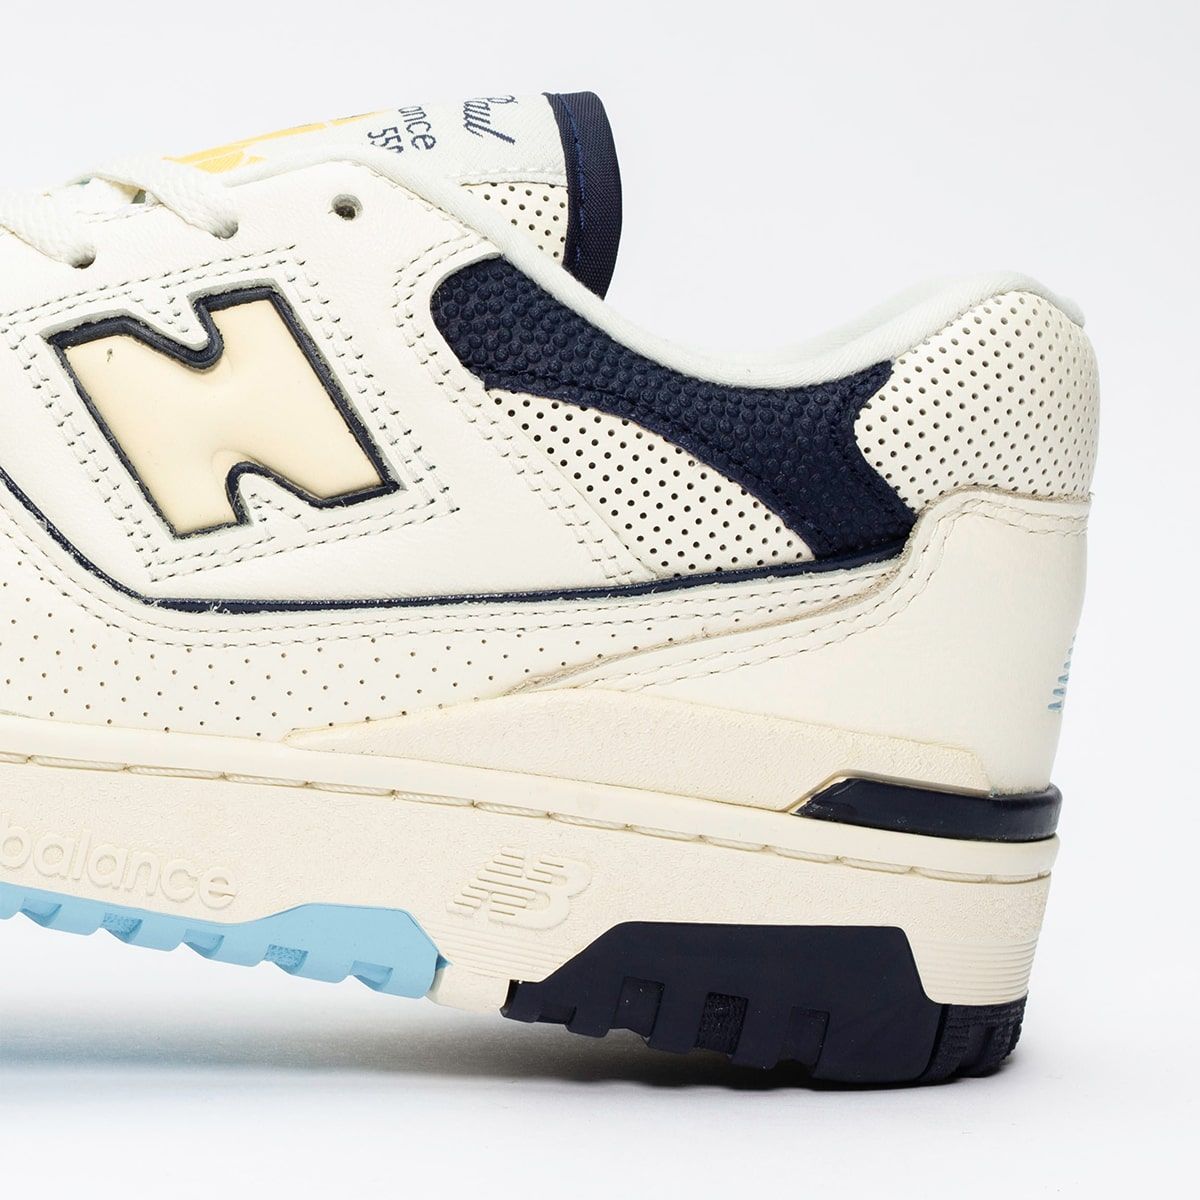 Where to Buy the Rich Paul x New Balance 550 | HOUSE OF HEAT